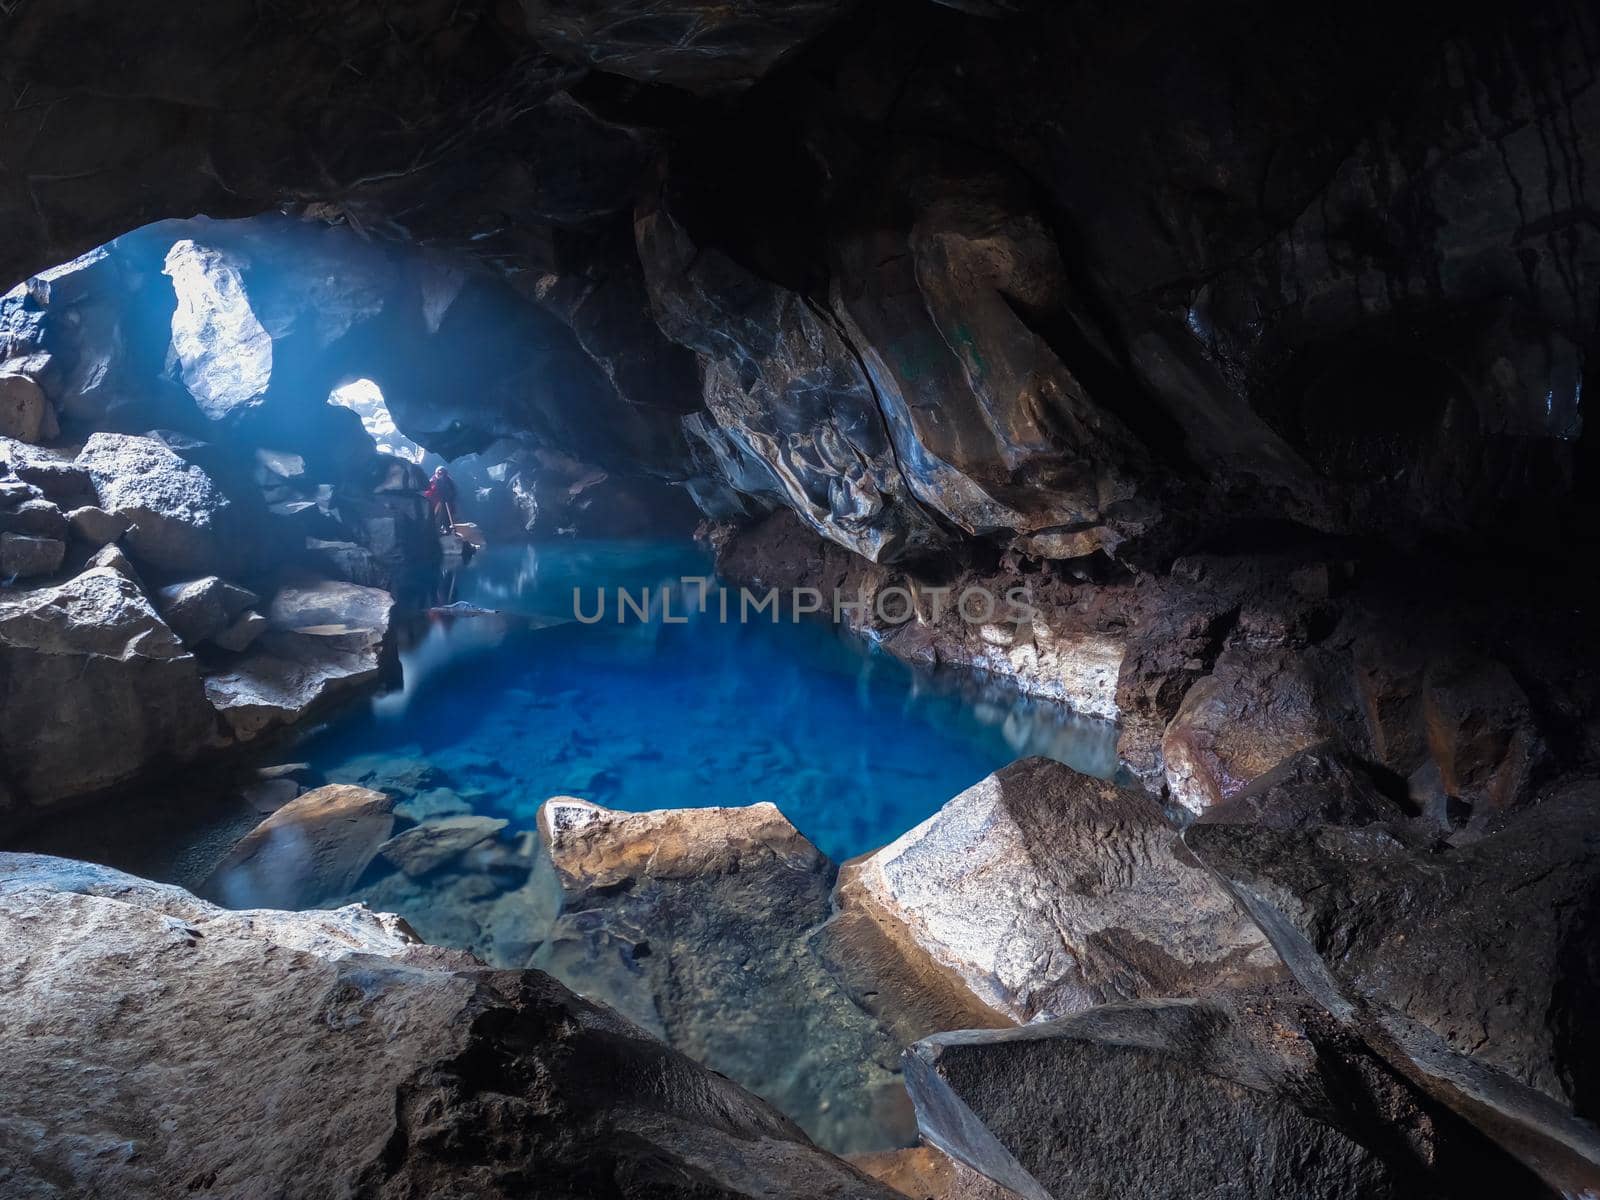 Deep blue lake inside the cave with unrecognizable photographer